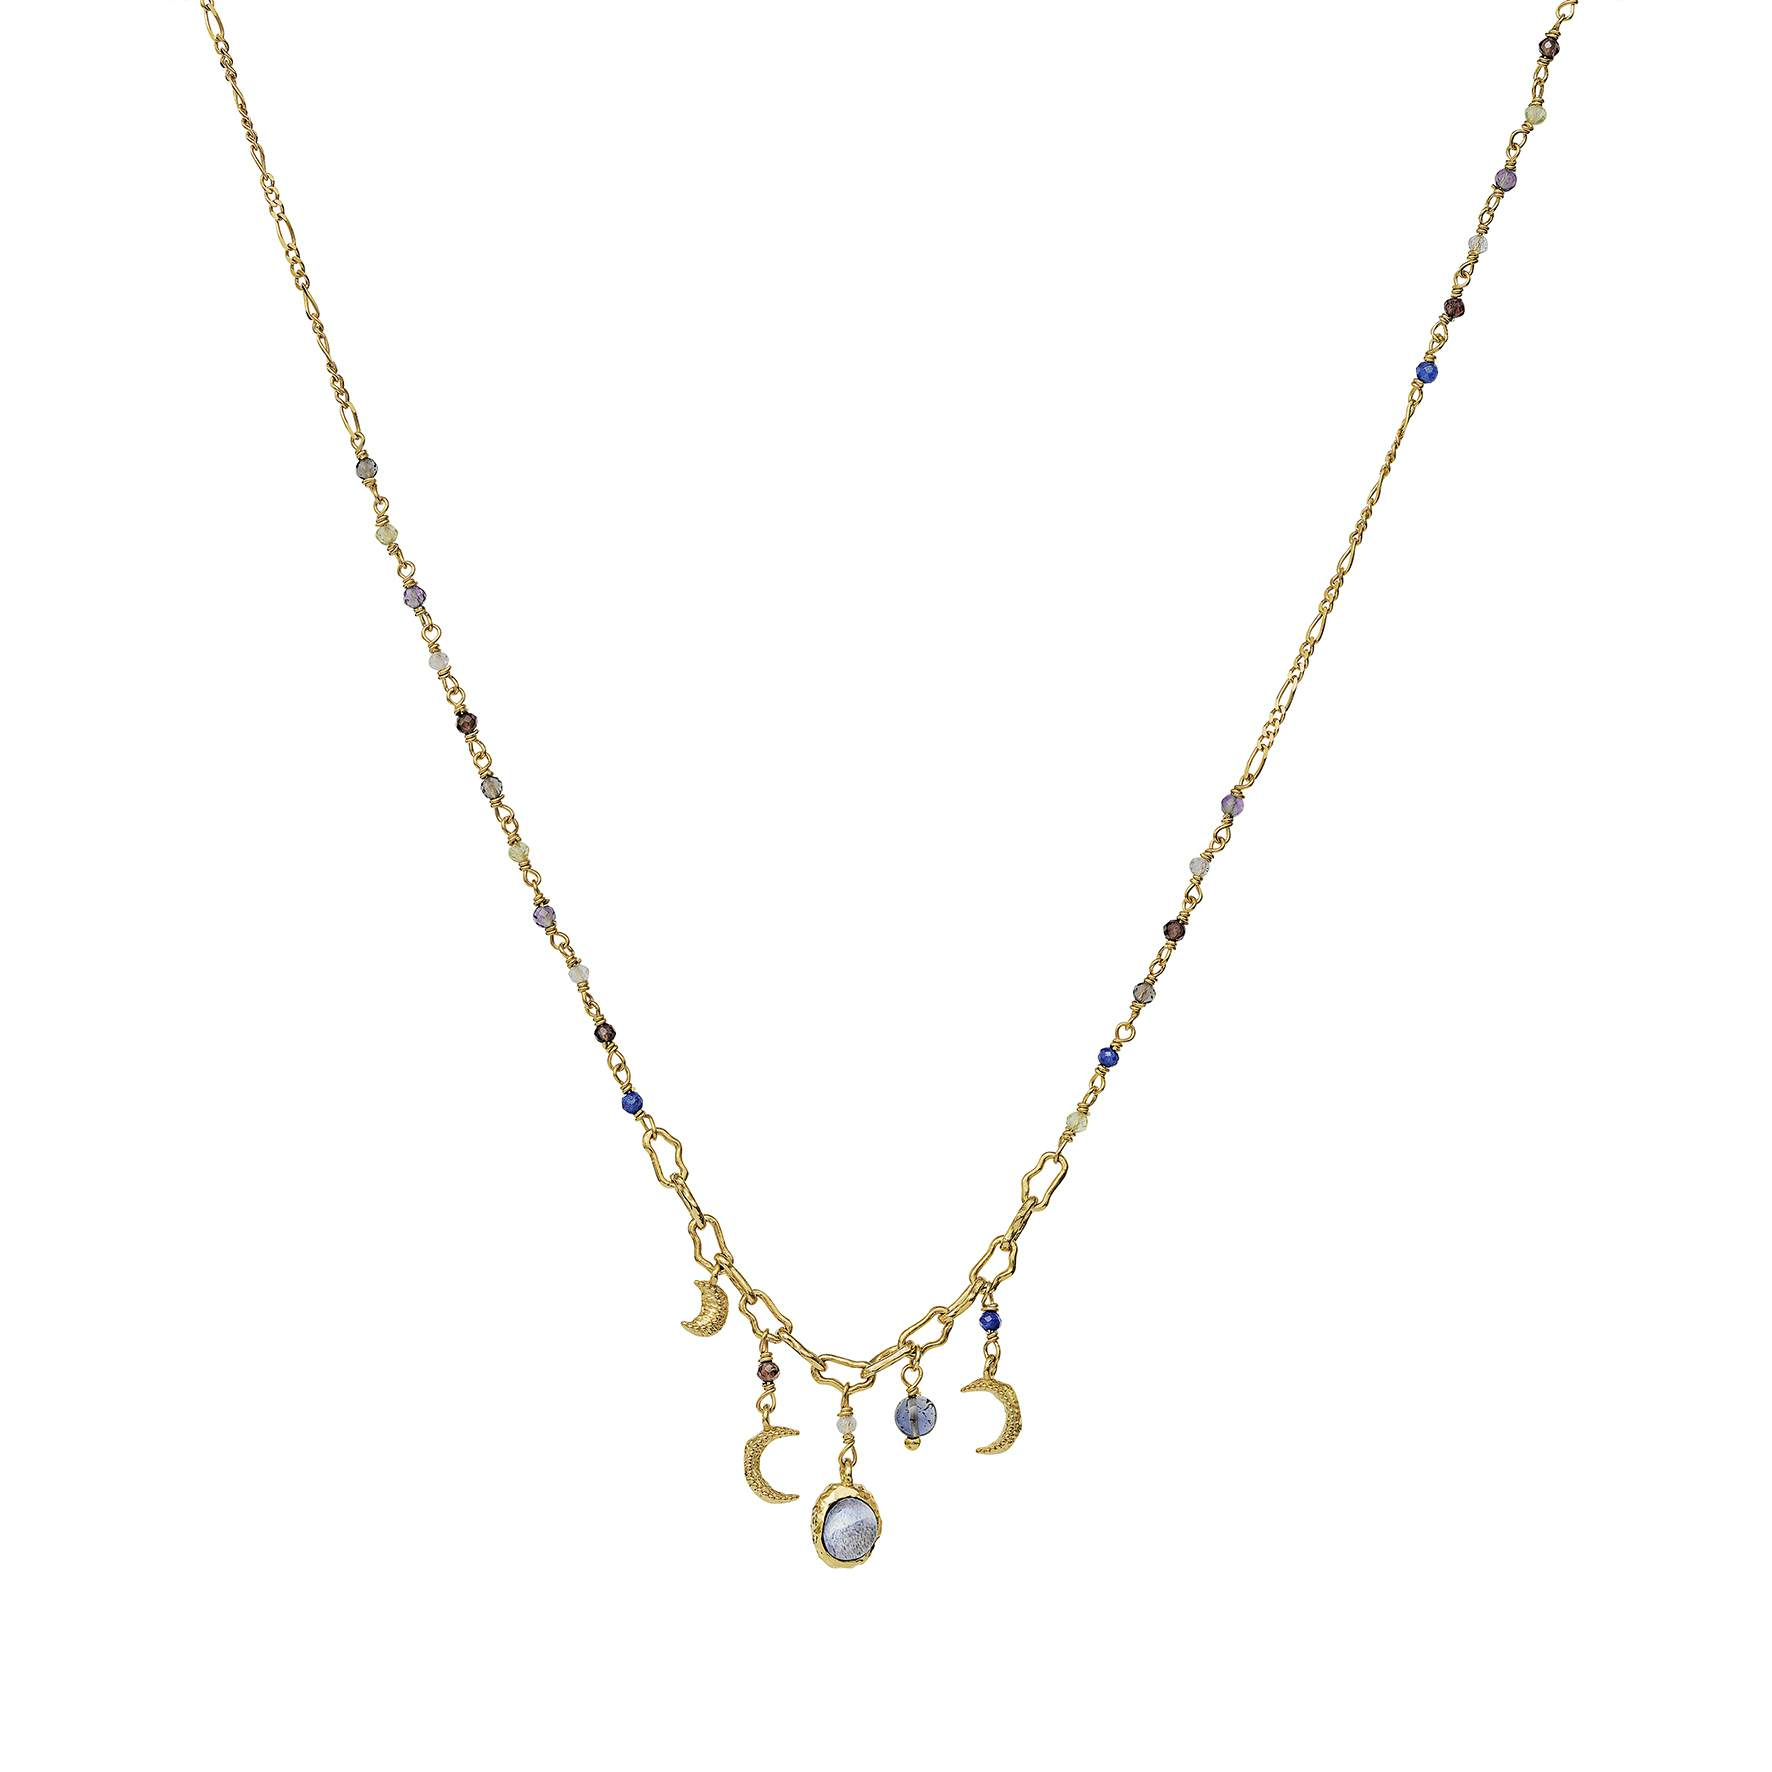 Oberon Necklace from Maanesten in Goldplated-Silver Sterling 925